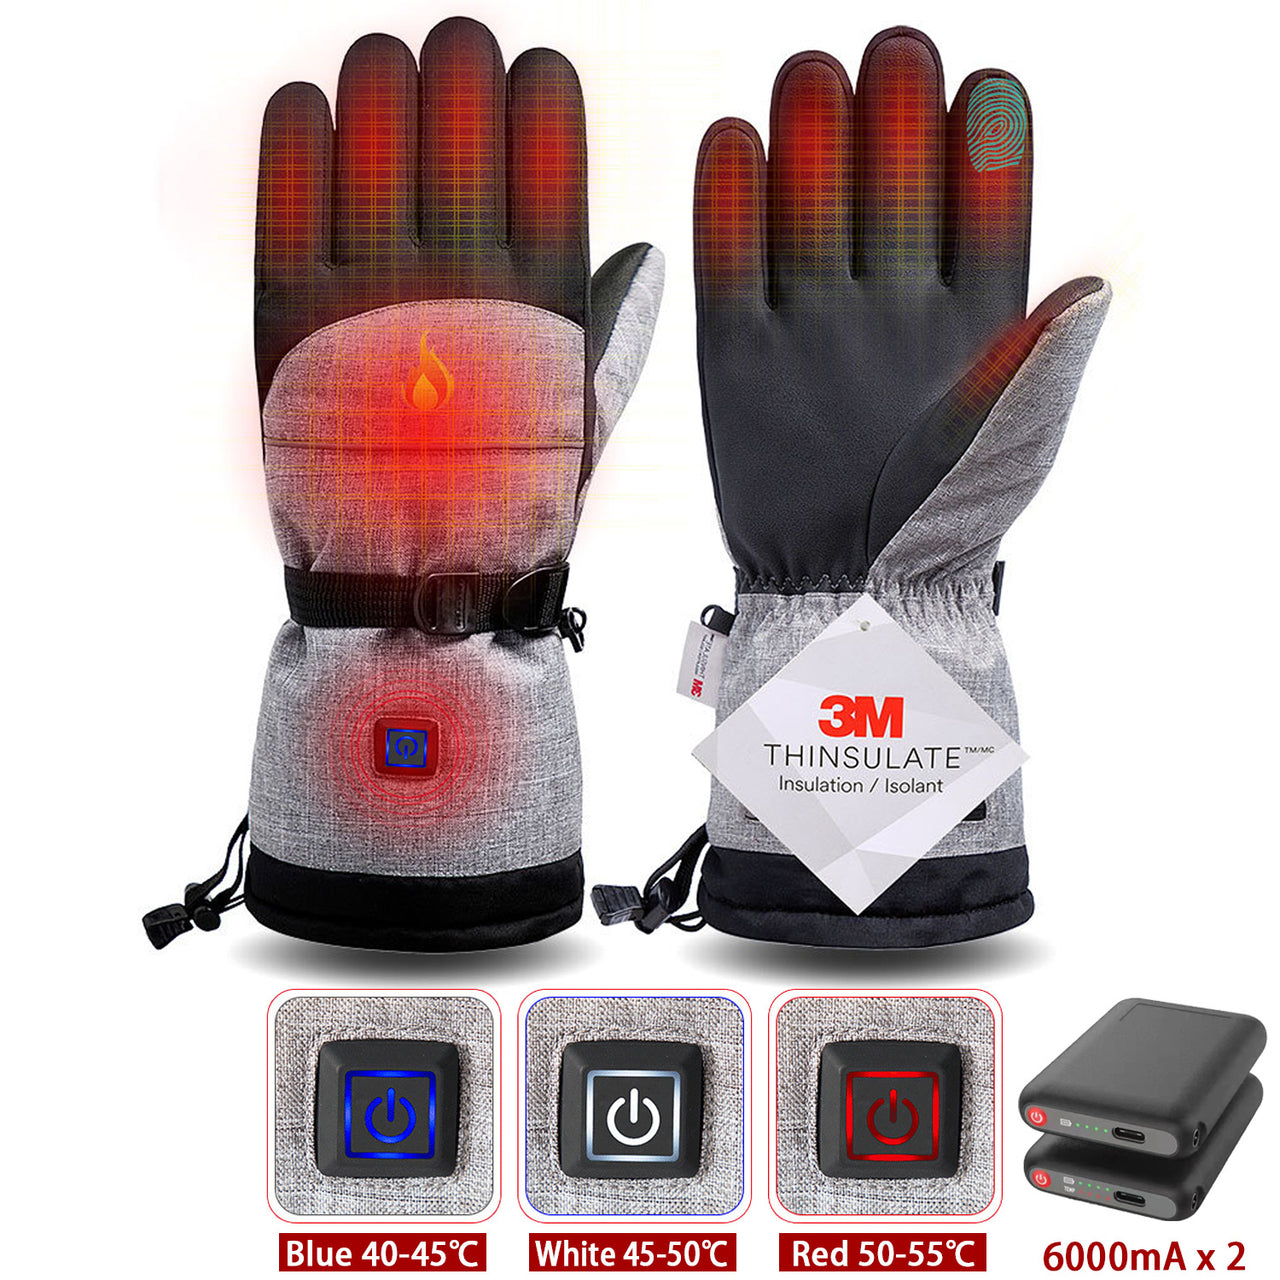 Winter Gloves 3M Cotton Heating Hand Warmer Electric Thermal Gloves Waterproof Snowboard Cycling Motorcycle Bicycle Ski Outdoor - Winter Gloves 3M - NosCiBe